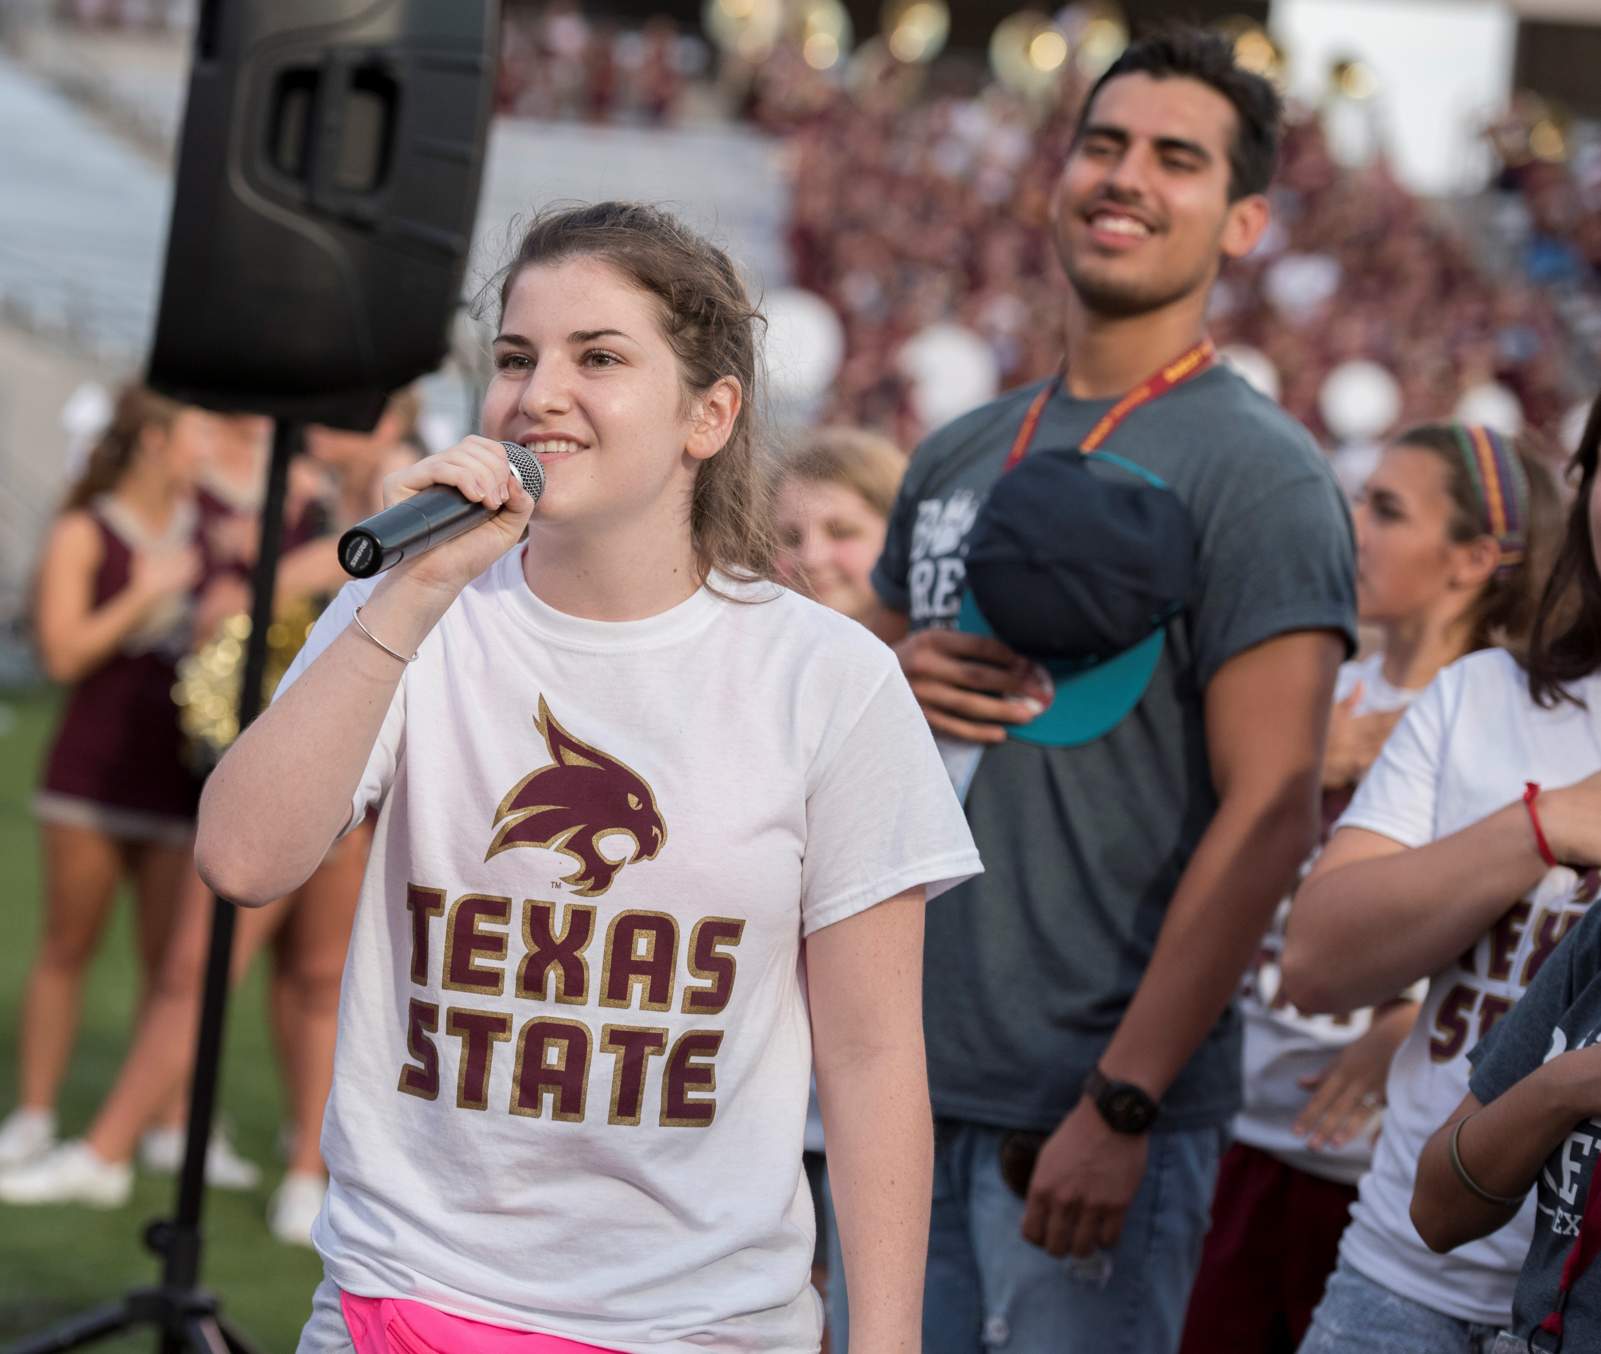 Student in Texas State T-shirt